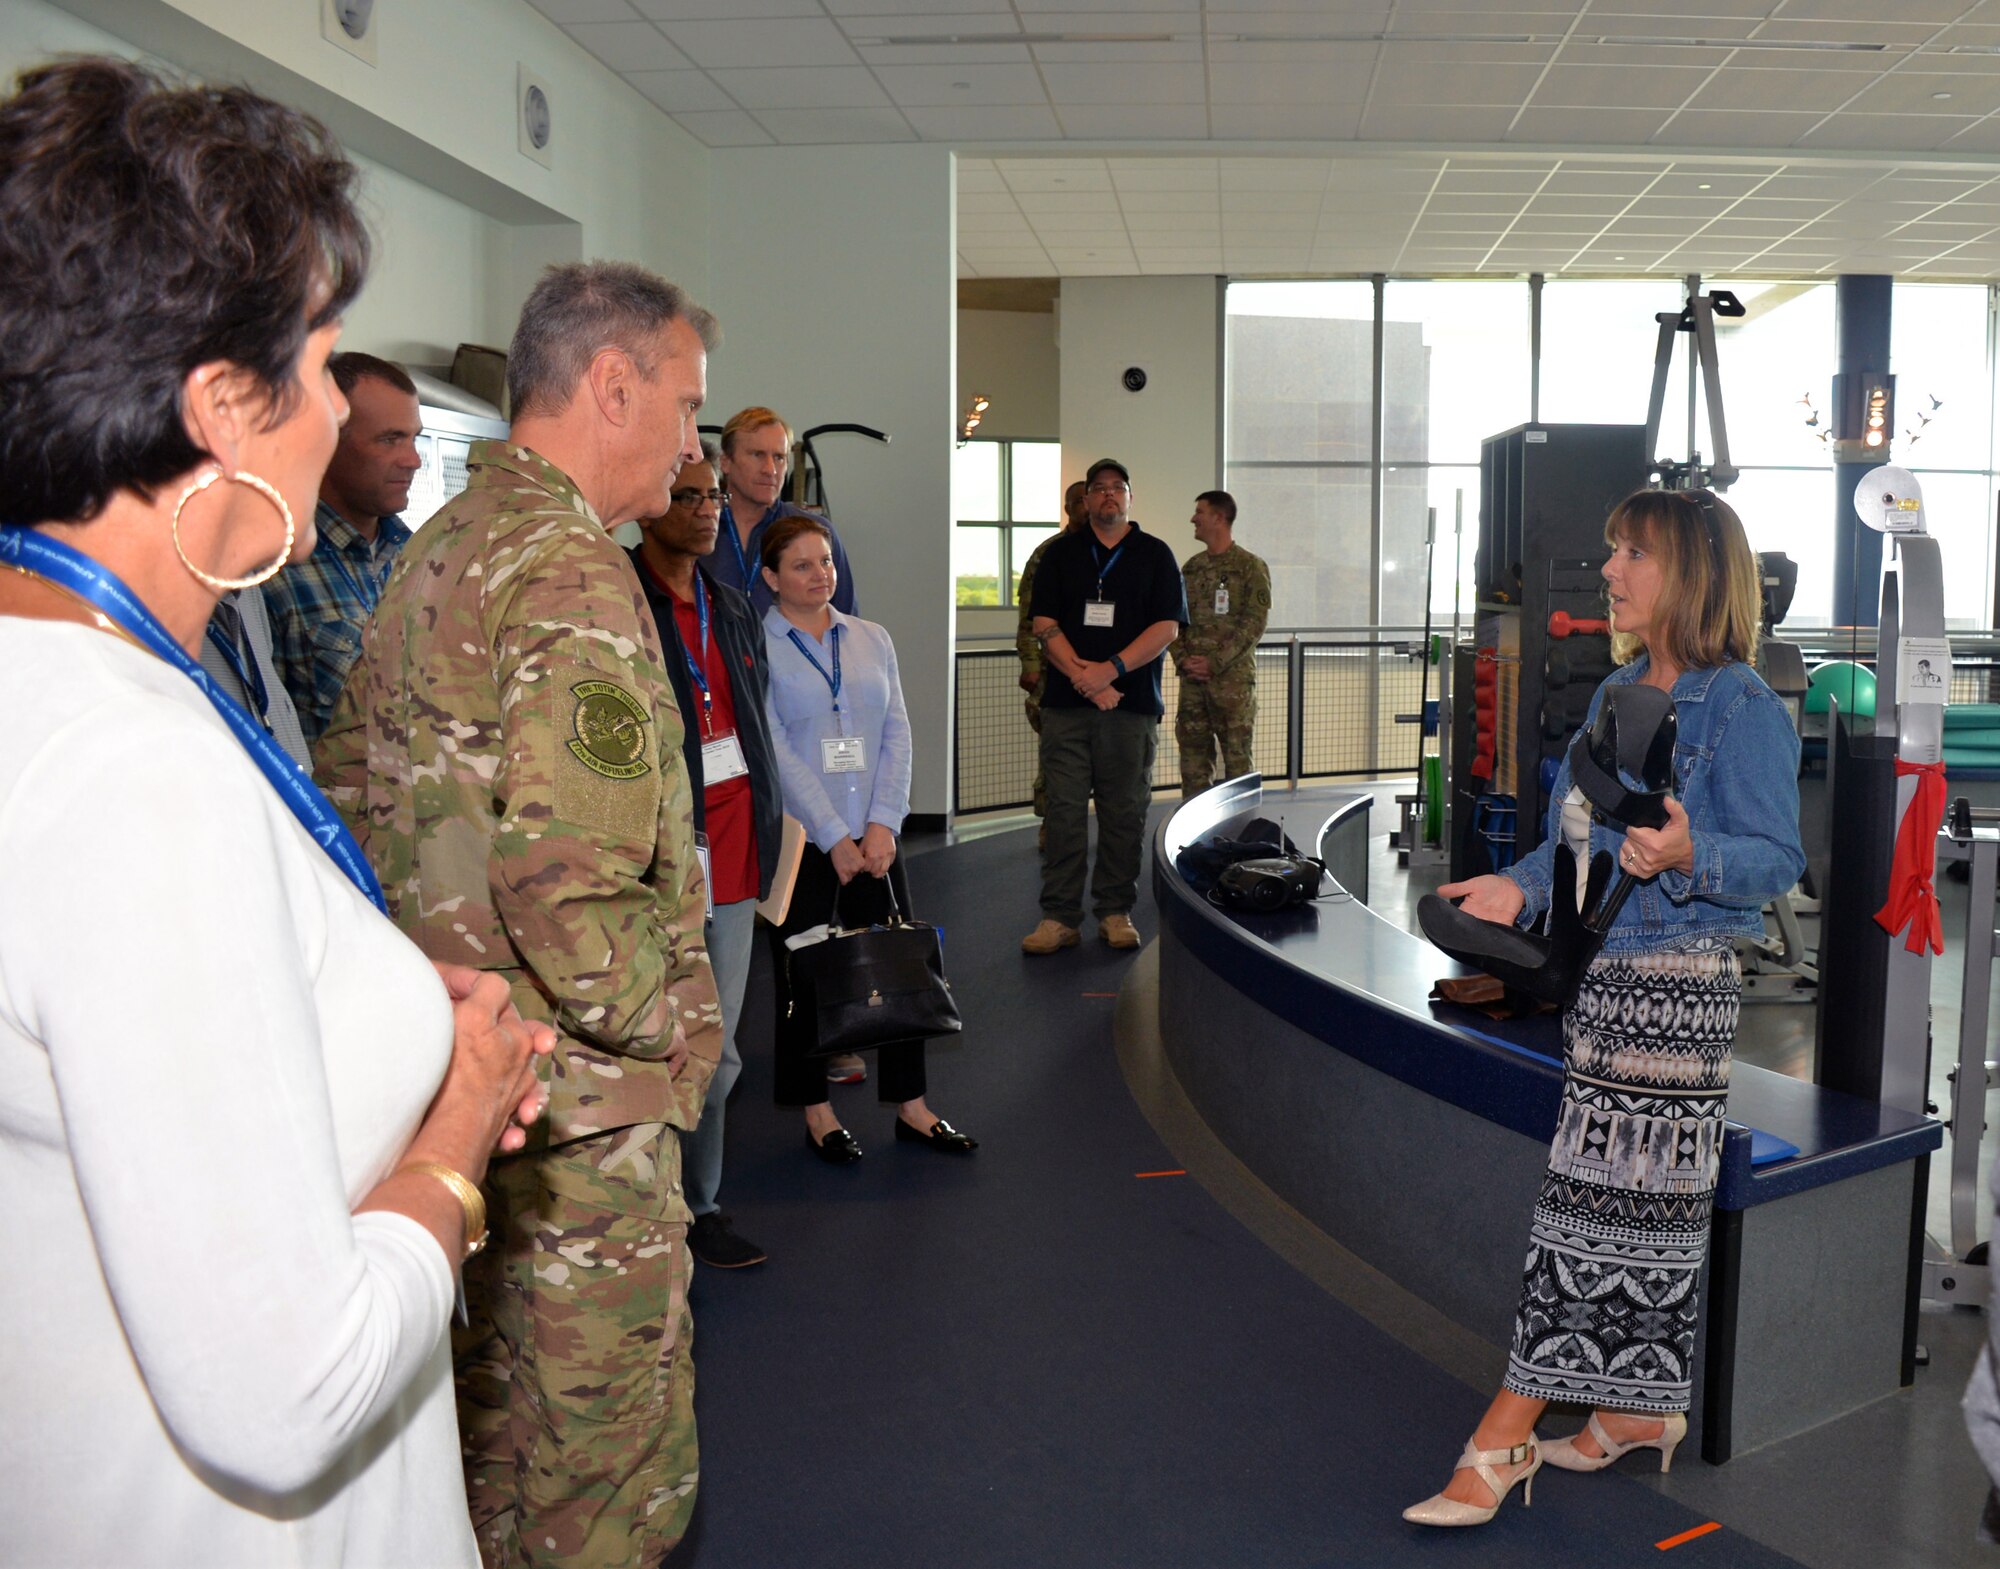 Lori Leal, Center for the Intrepid secretary, describes an Intrepid Dynamic Exoskeleton Orthosis at the Center for the Intrepid to a group of civic leaders from the March Air Reserve Base, California area at Joint Base San Antonio-Fort Sam Houston, Texas Oct. 1, 2018.